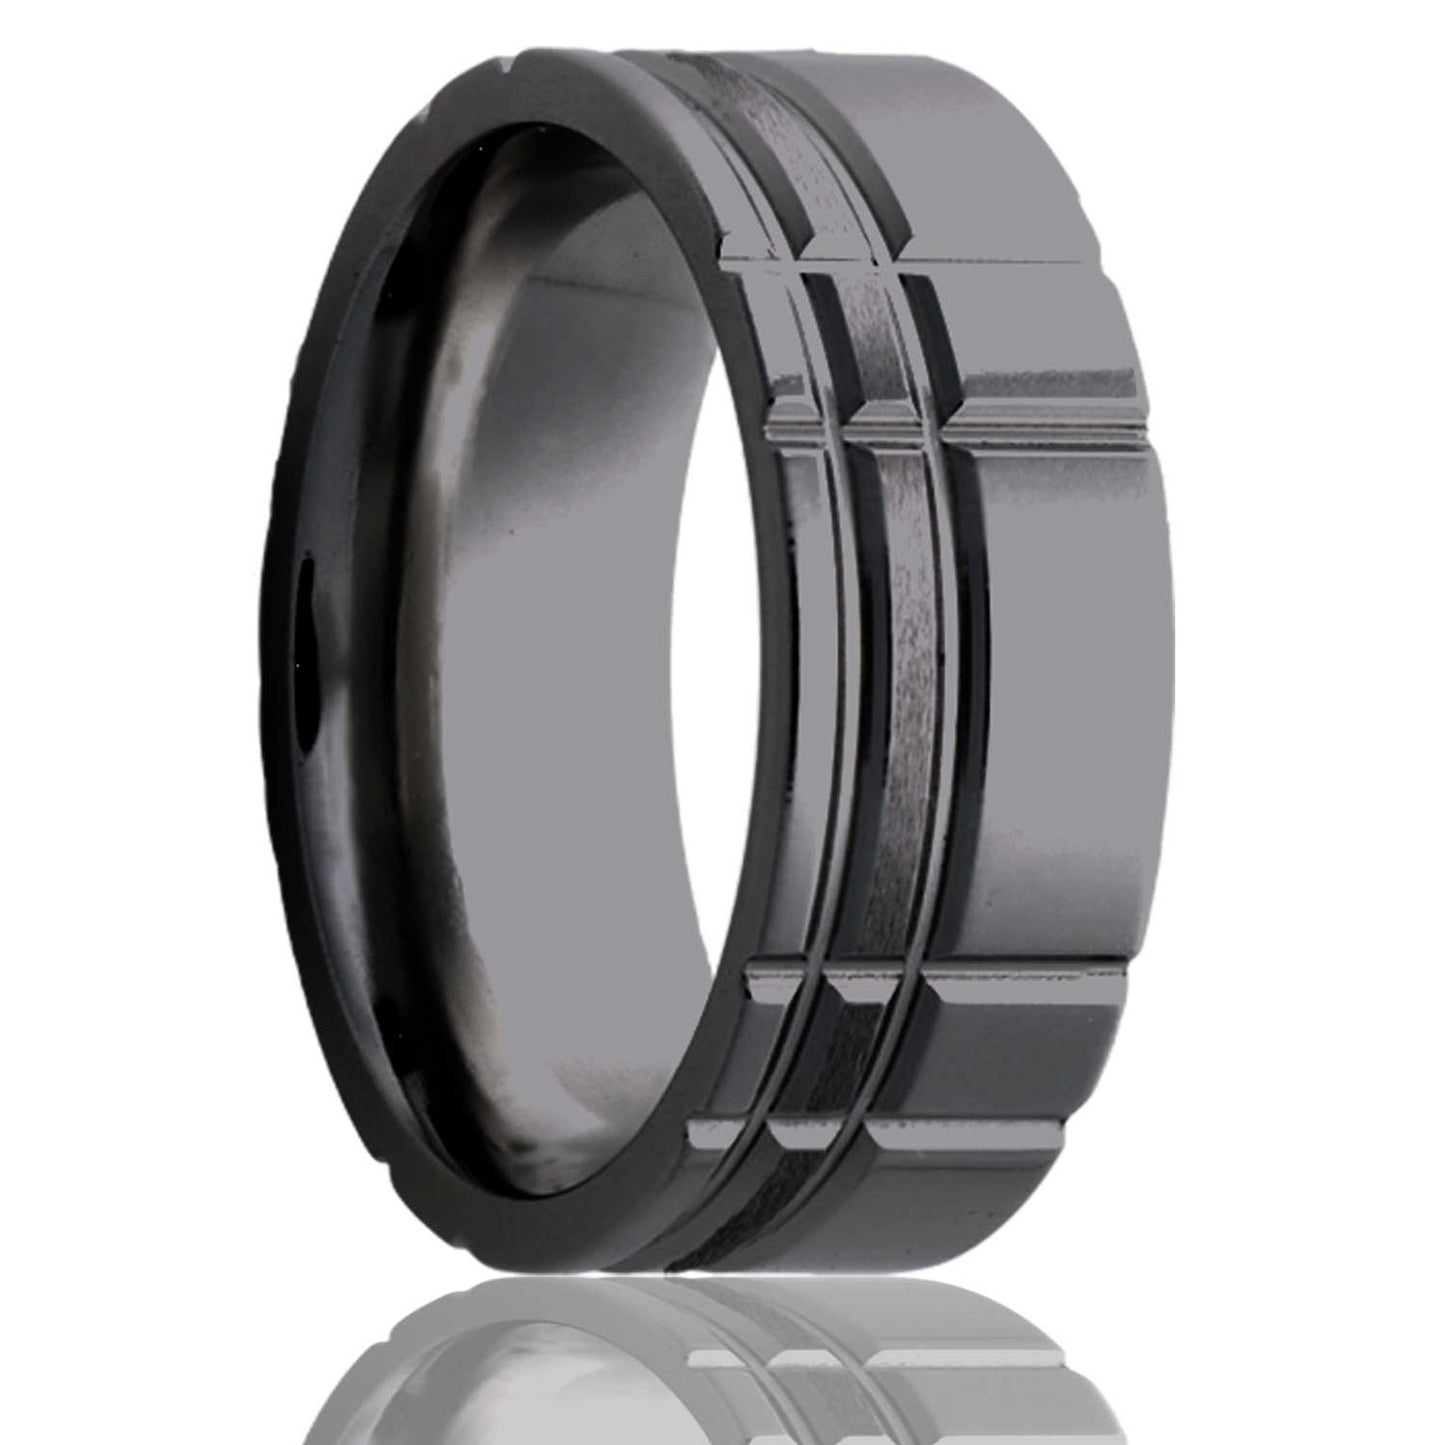 A asymmetrical intersecting grooves satin finish zirconium men's wedding band displayed on a neutral white background.